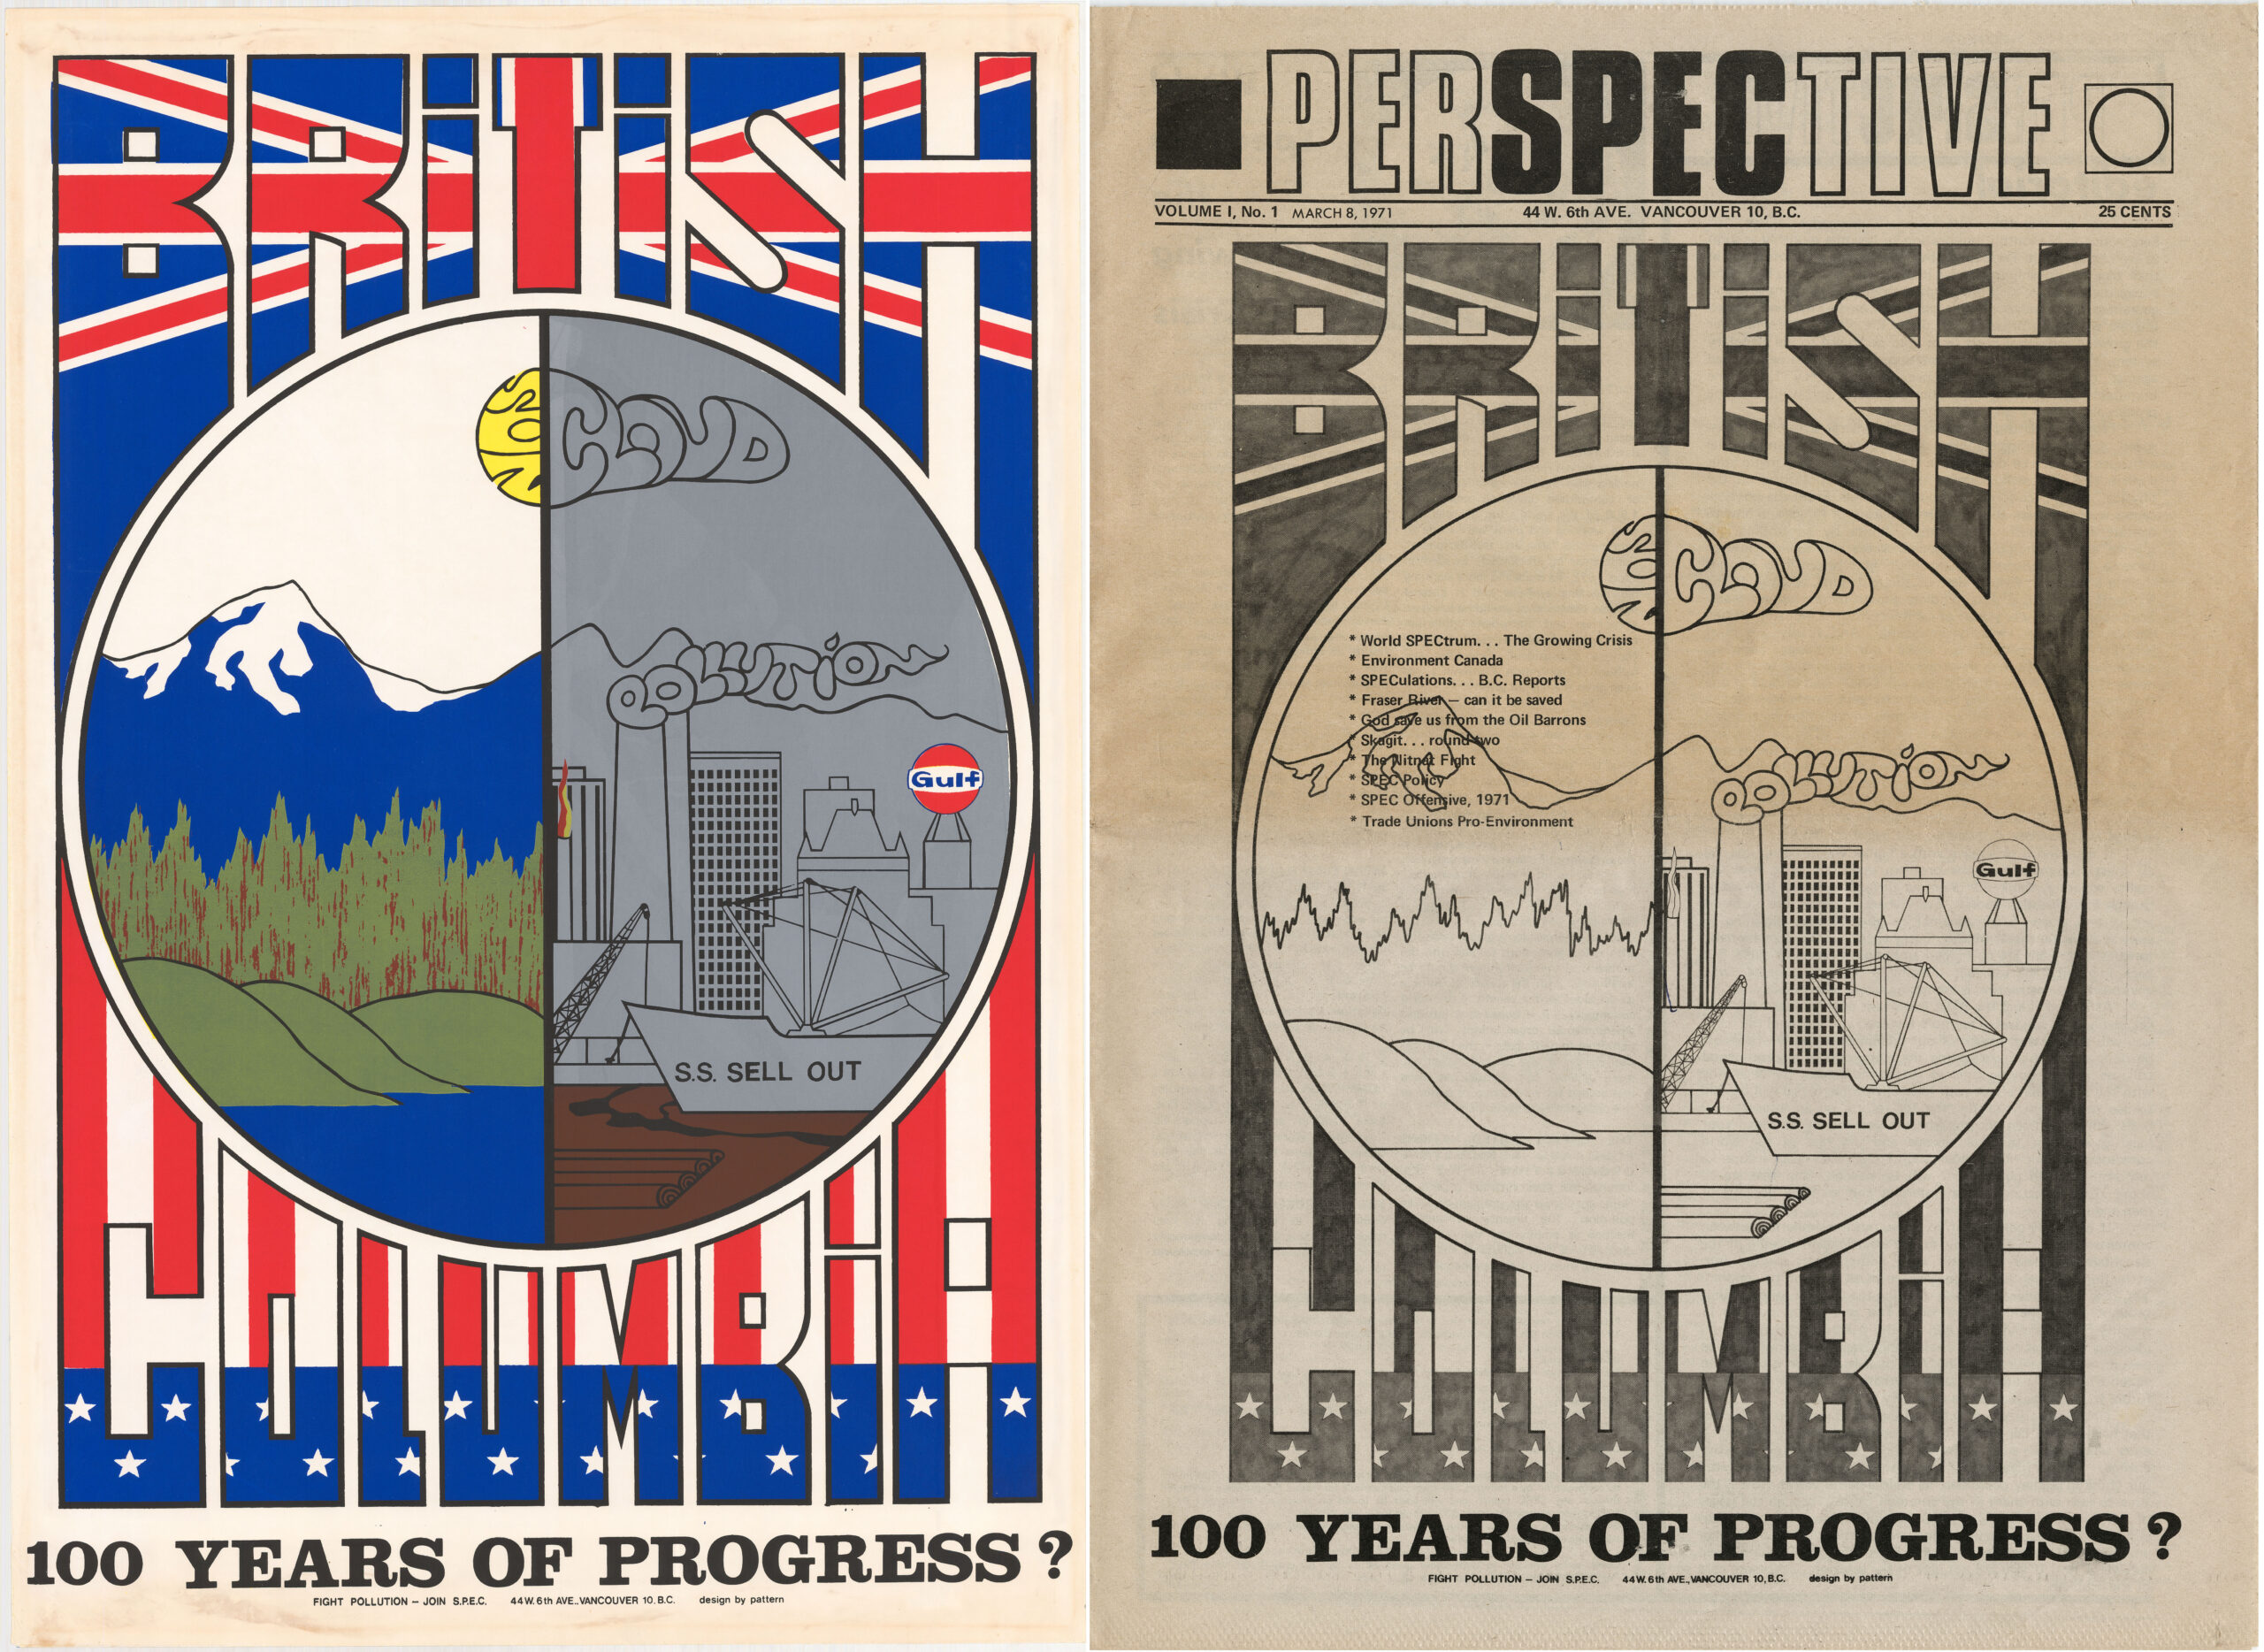 SPEC poster created for BC centennial designed by Pattern (left) and the same graphic used for the cover of the SPEC newspaper, Perspective, Vol. 1, No.1 (right), 1971. Reference code: AM1556-S7-- and AM1556-S6